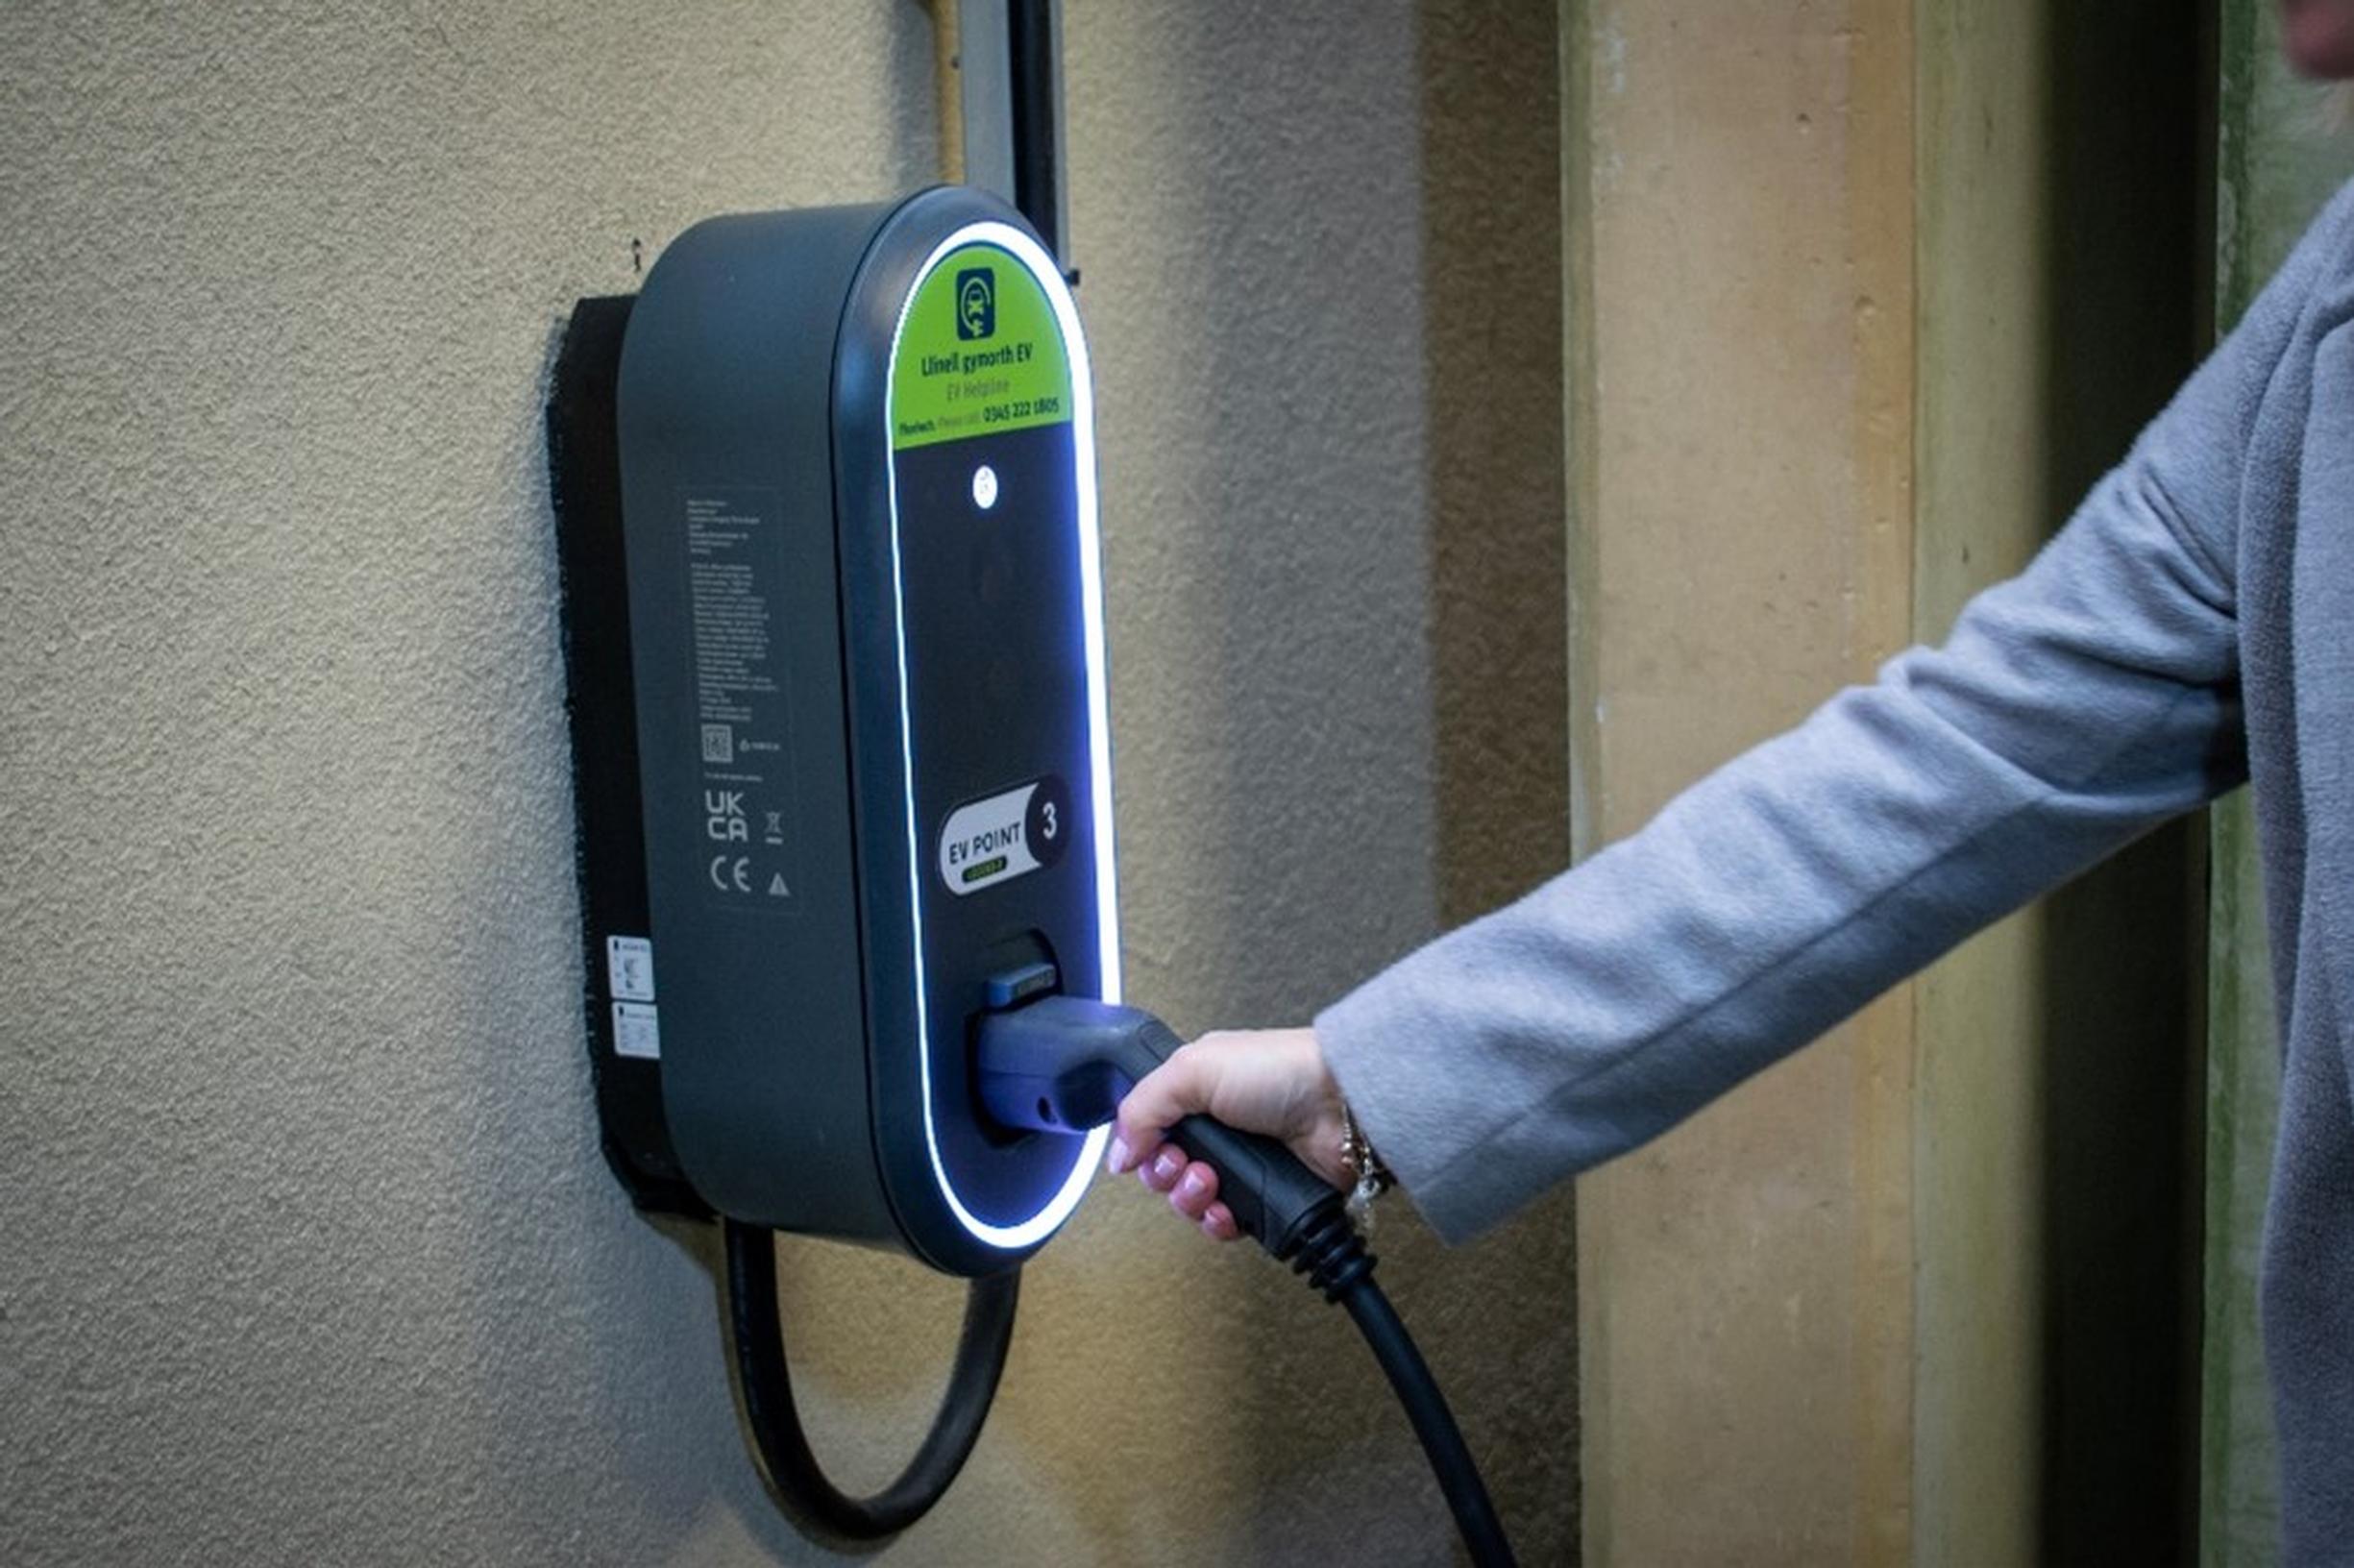 An APCOA chargepoint